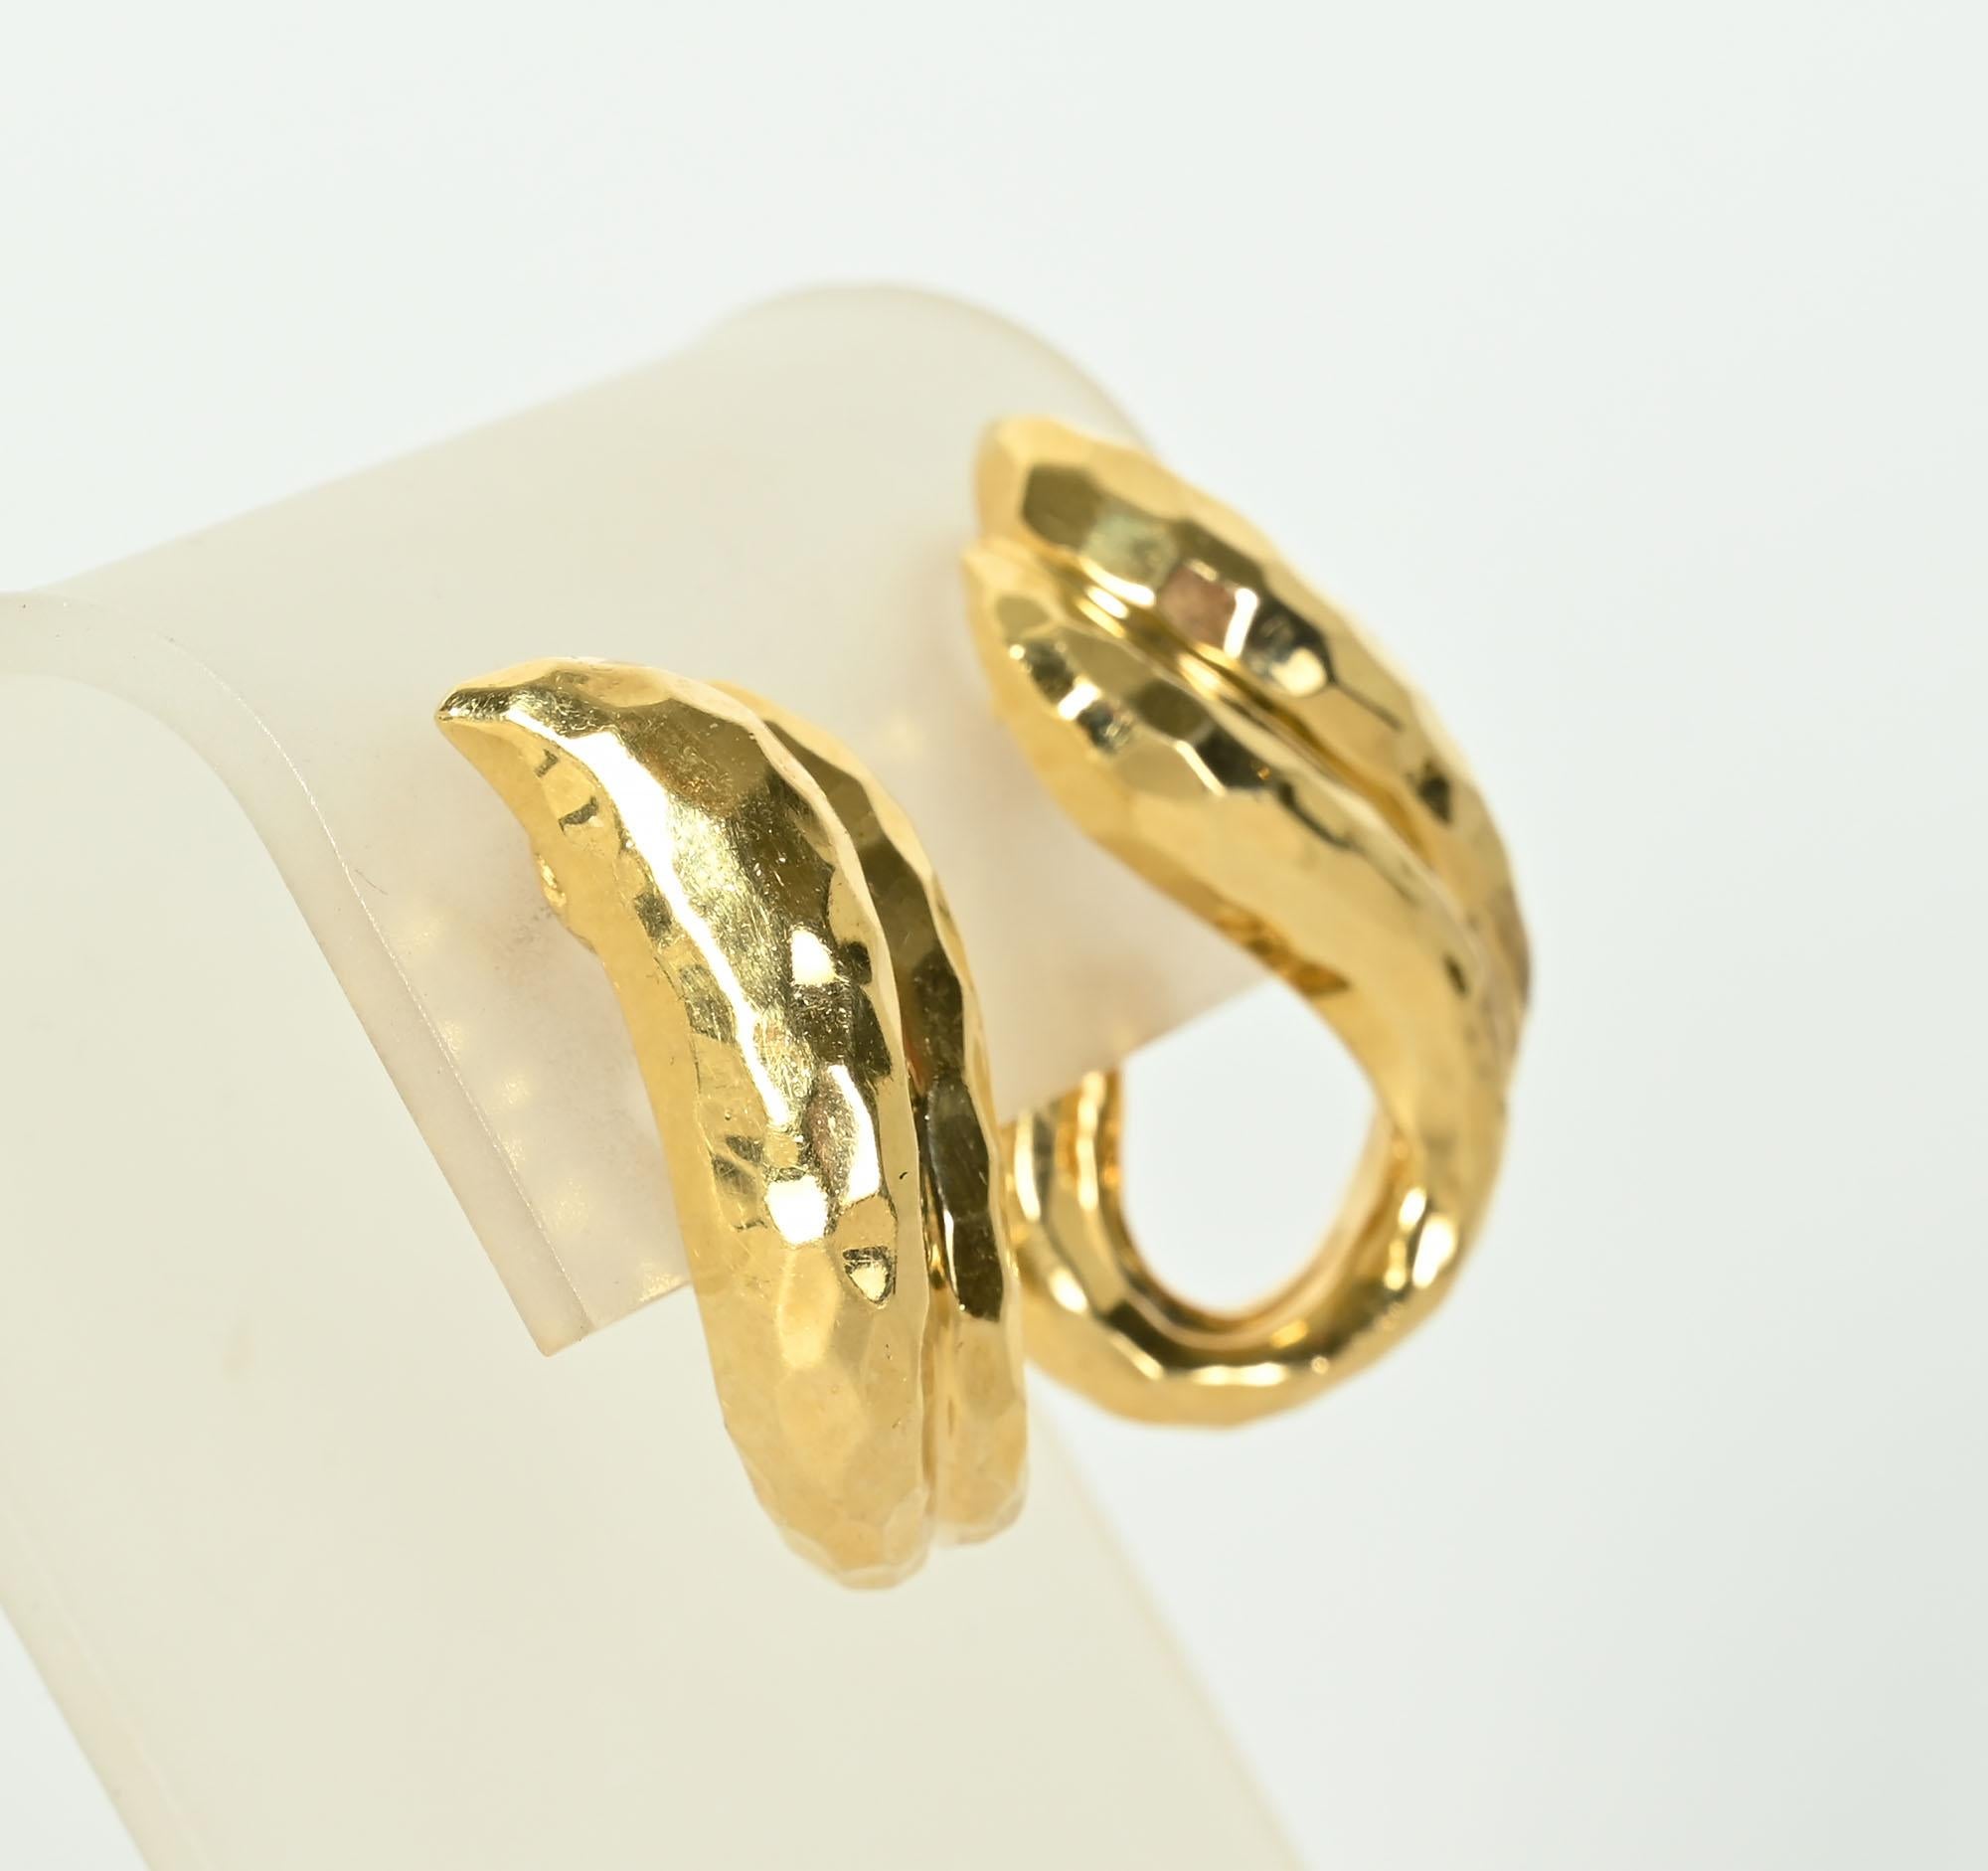 Contemporary Henry Dunay Hammered Gold Earrings For Sale